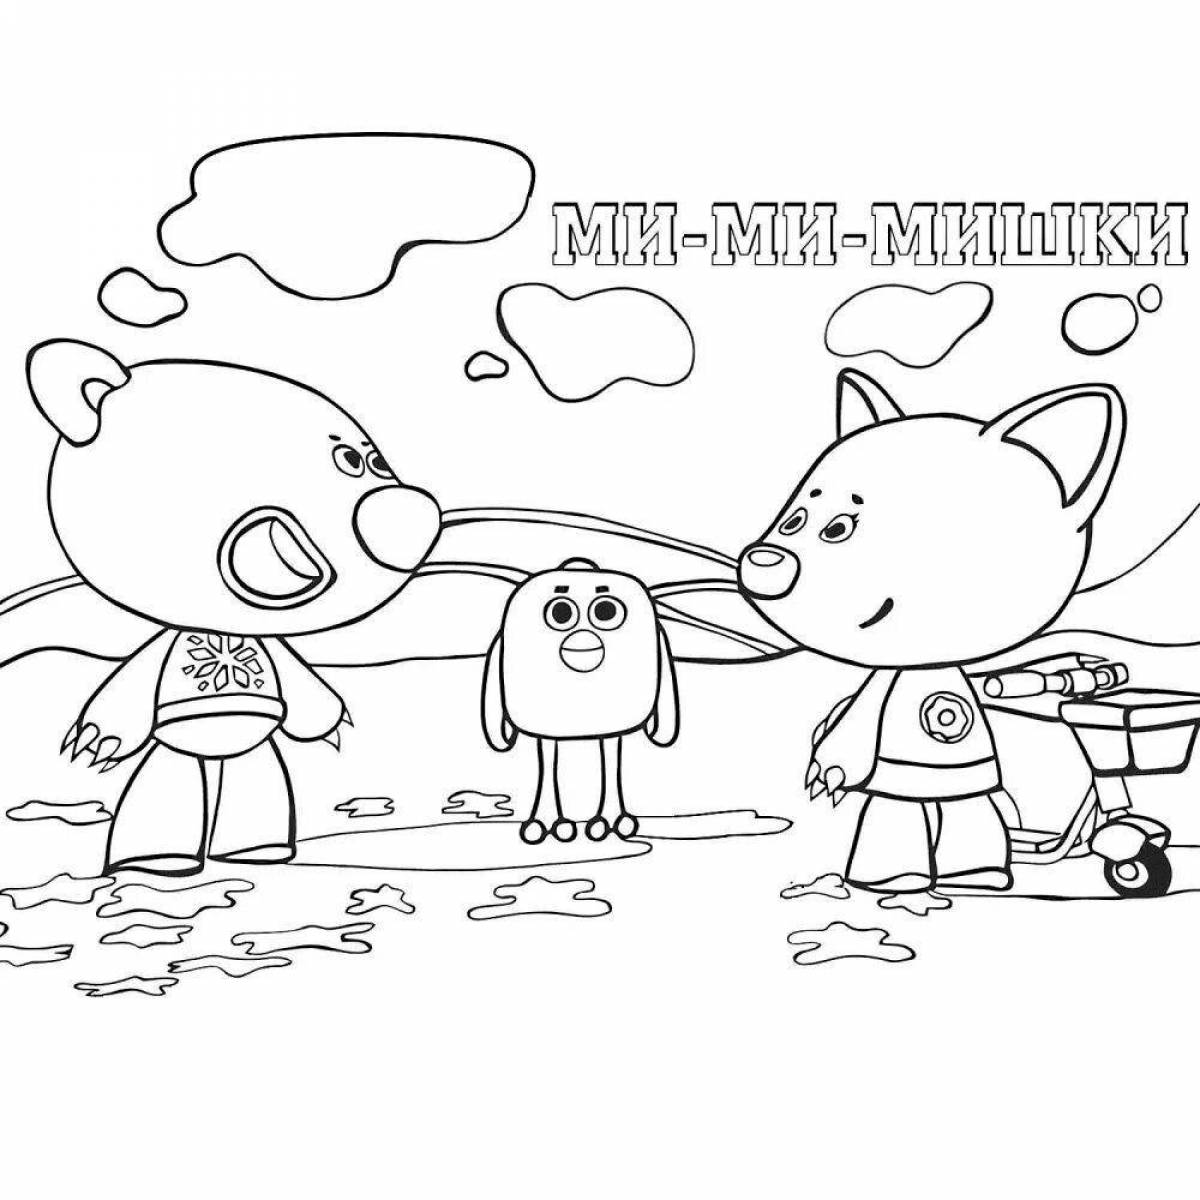 Playful cache coloring page